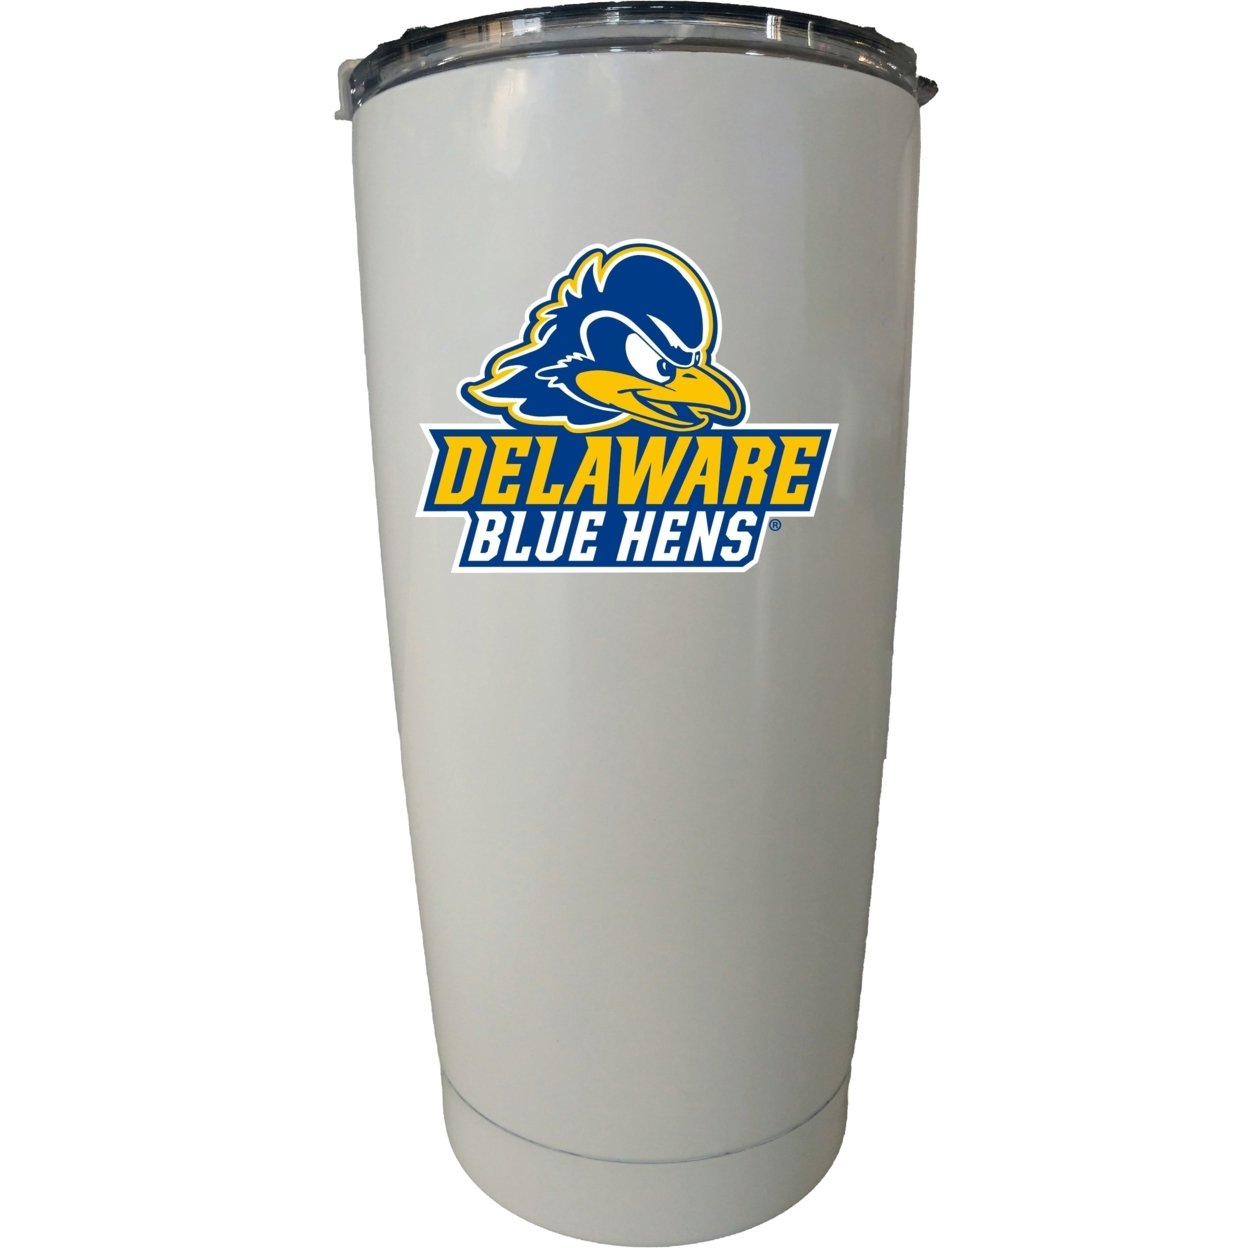 Delaware Blue Hens 16 Oz Choose Your Color Insulated Stainless Steel Tumbler Choose Your Color.